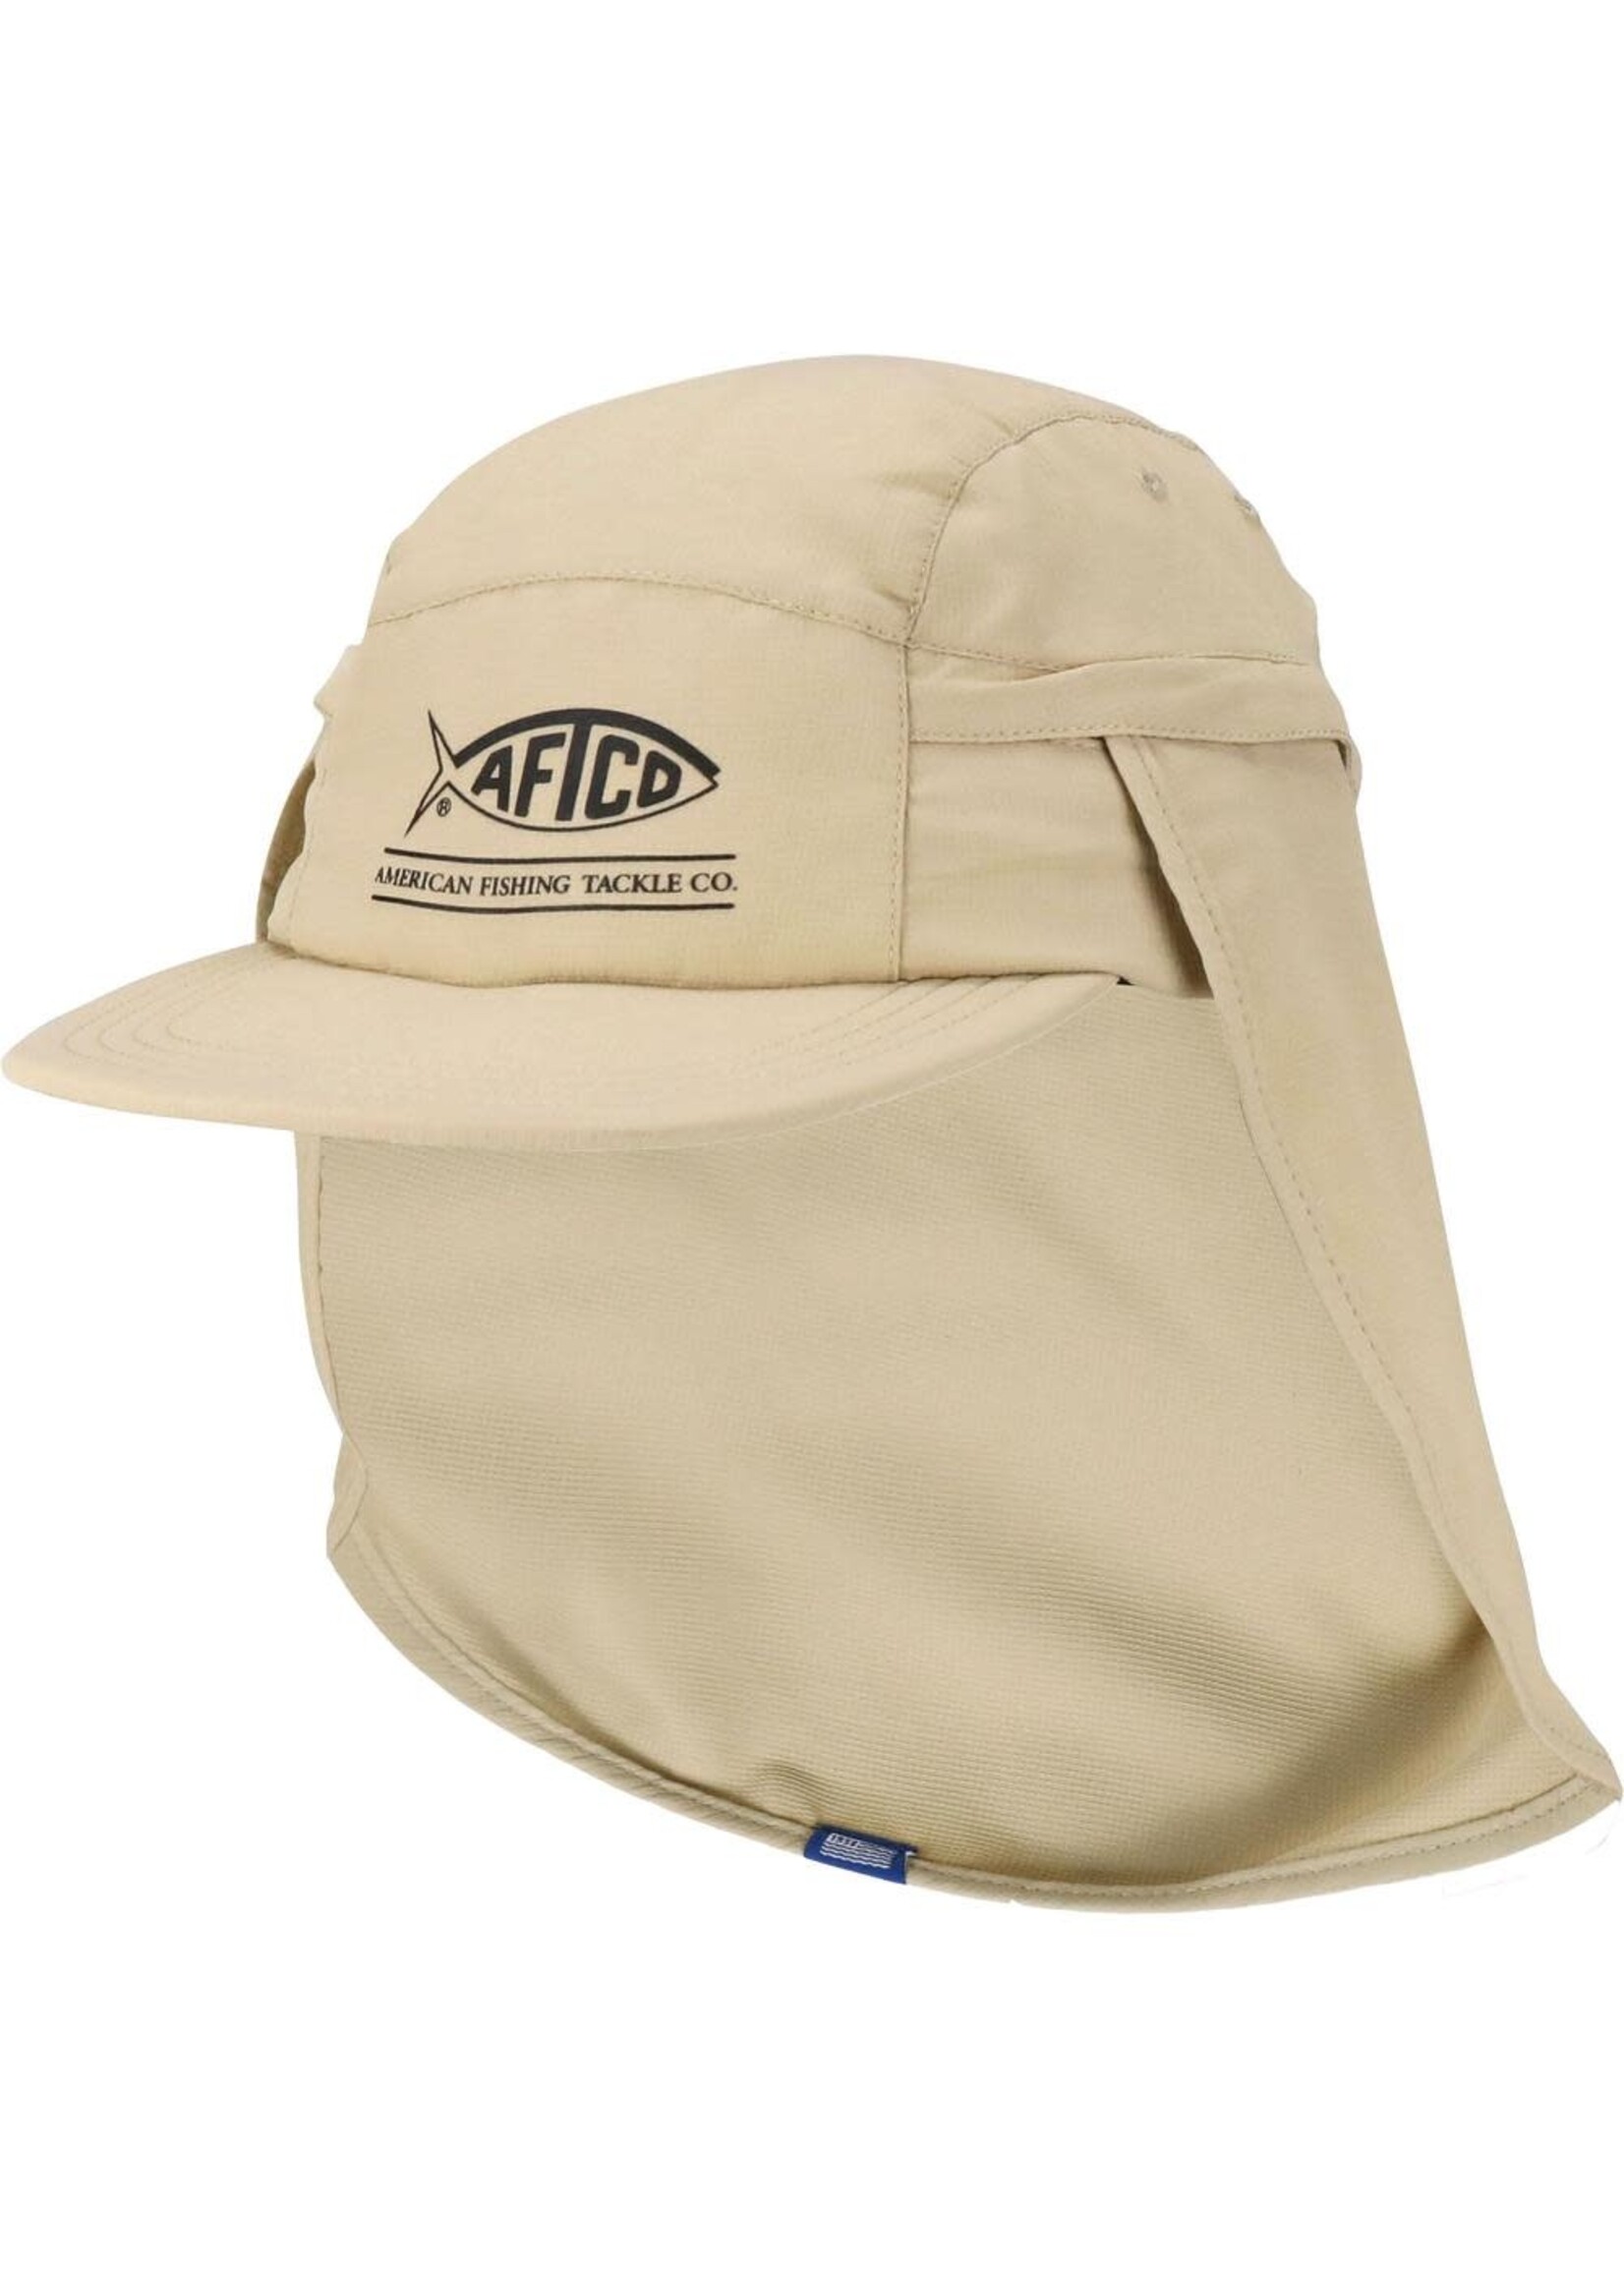 AFTCO AFTCO Fishing Guide Hat